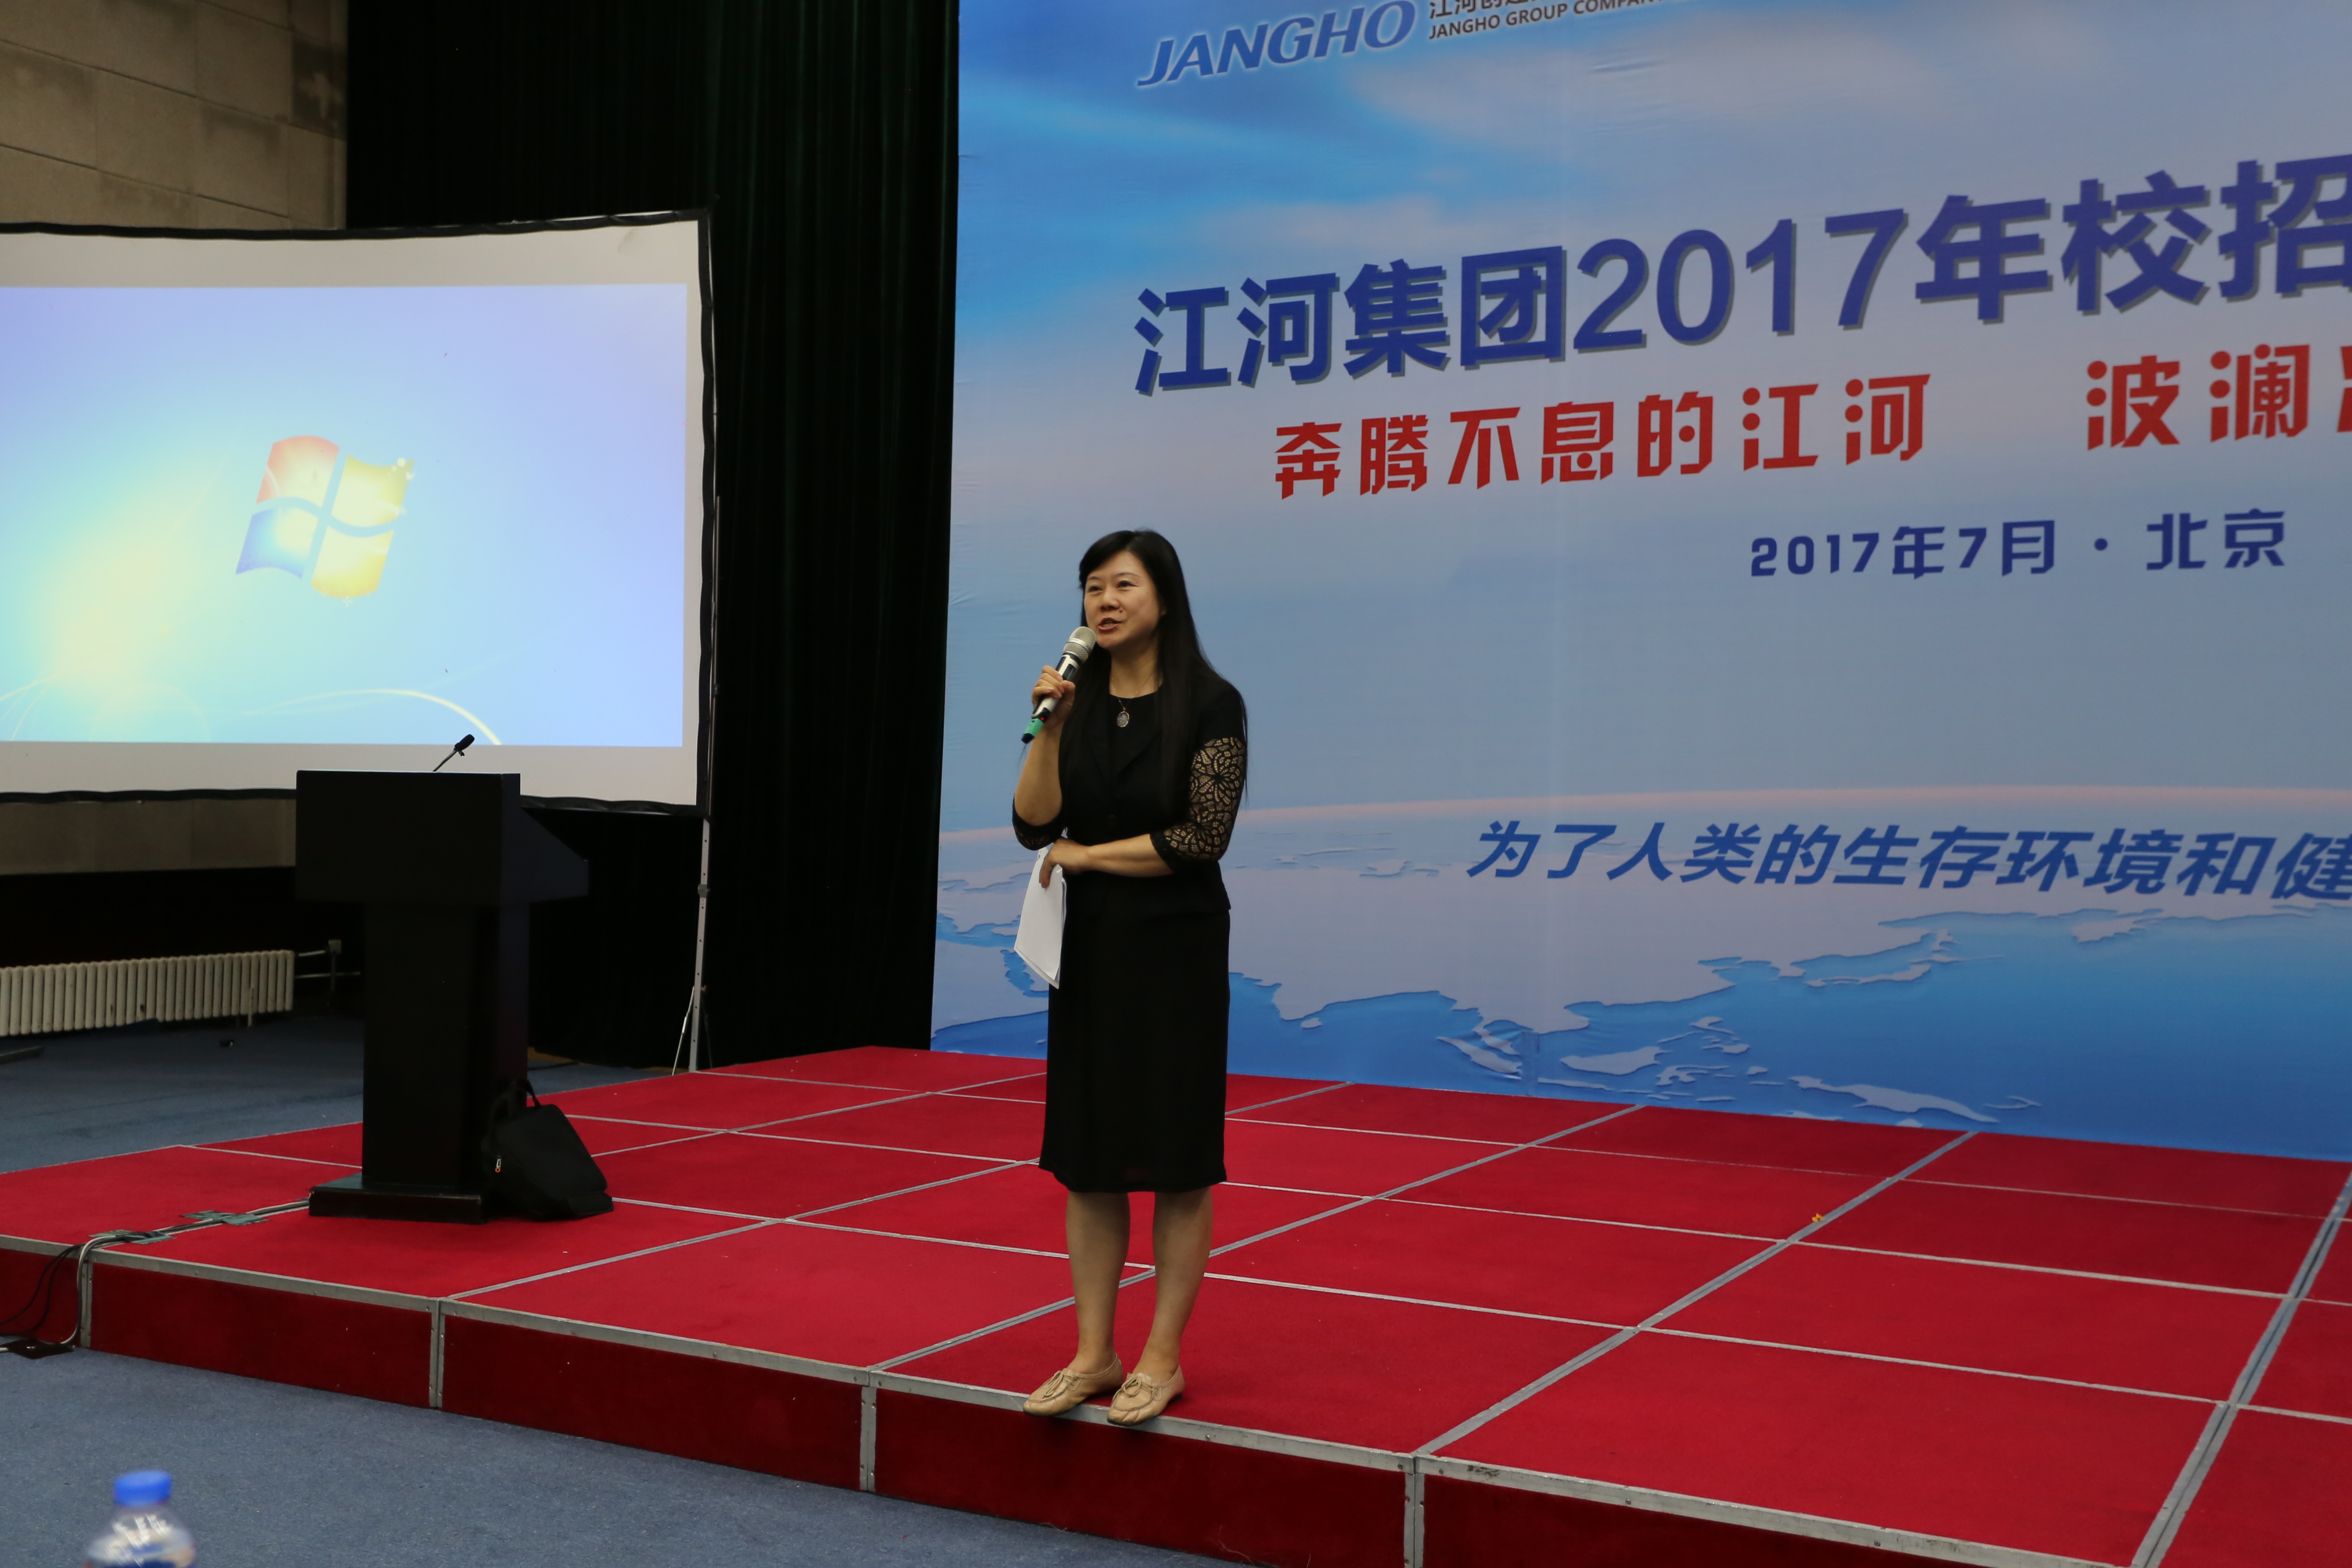 Realize Dream with Jangho in Poetic Youth——Jangho Group’s 2017 Initial Training for Graduates is Successfully Held in Beijing